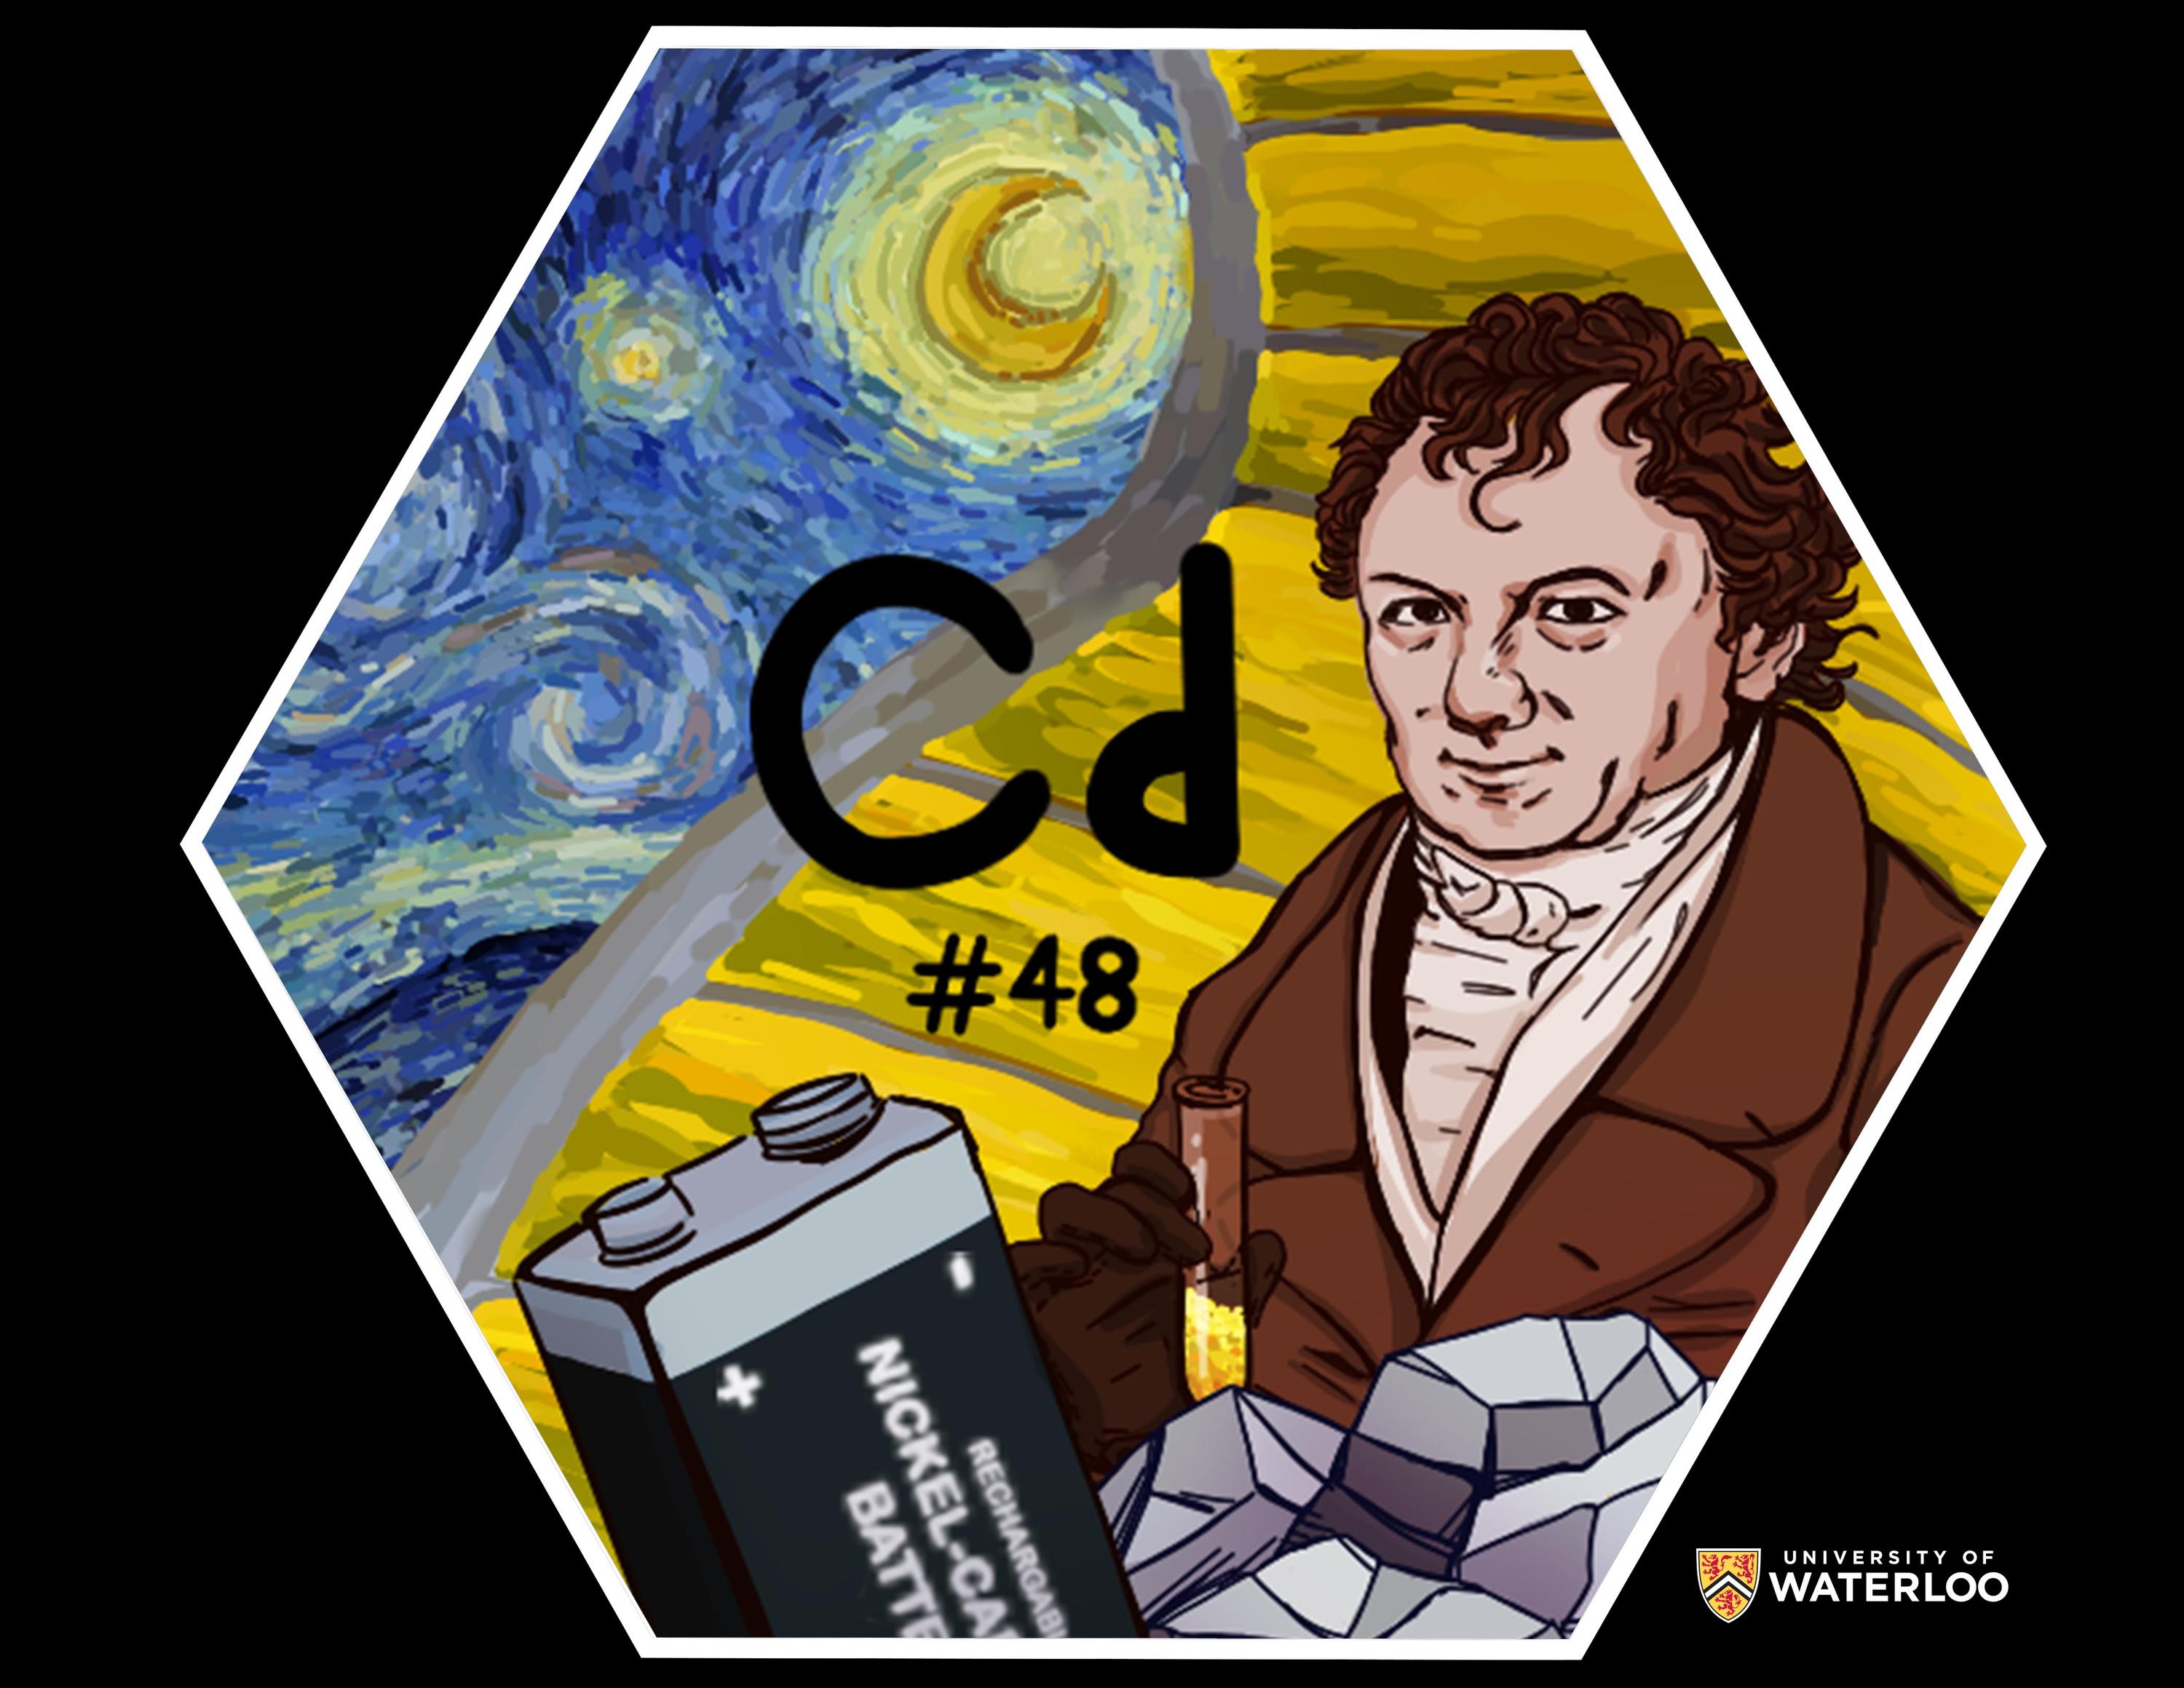 Digital composite. Chemical symbol “Cd” and “#48” appear centre. To the right, a portrait of Friedrich Stromeyer holding a yellow test tube in front of a yellow background. Left is a section of Vincent Van Gogh’s painting “Starry Night”. Bottom are a rechargeable nickel-cadmium battery and rocks containing cadmium.